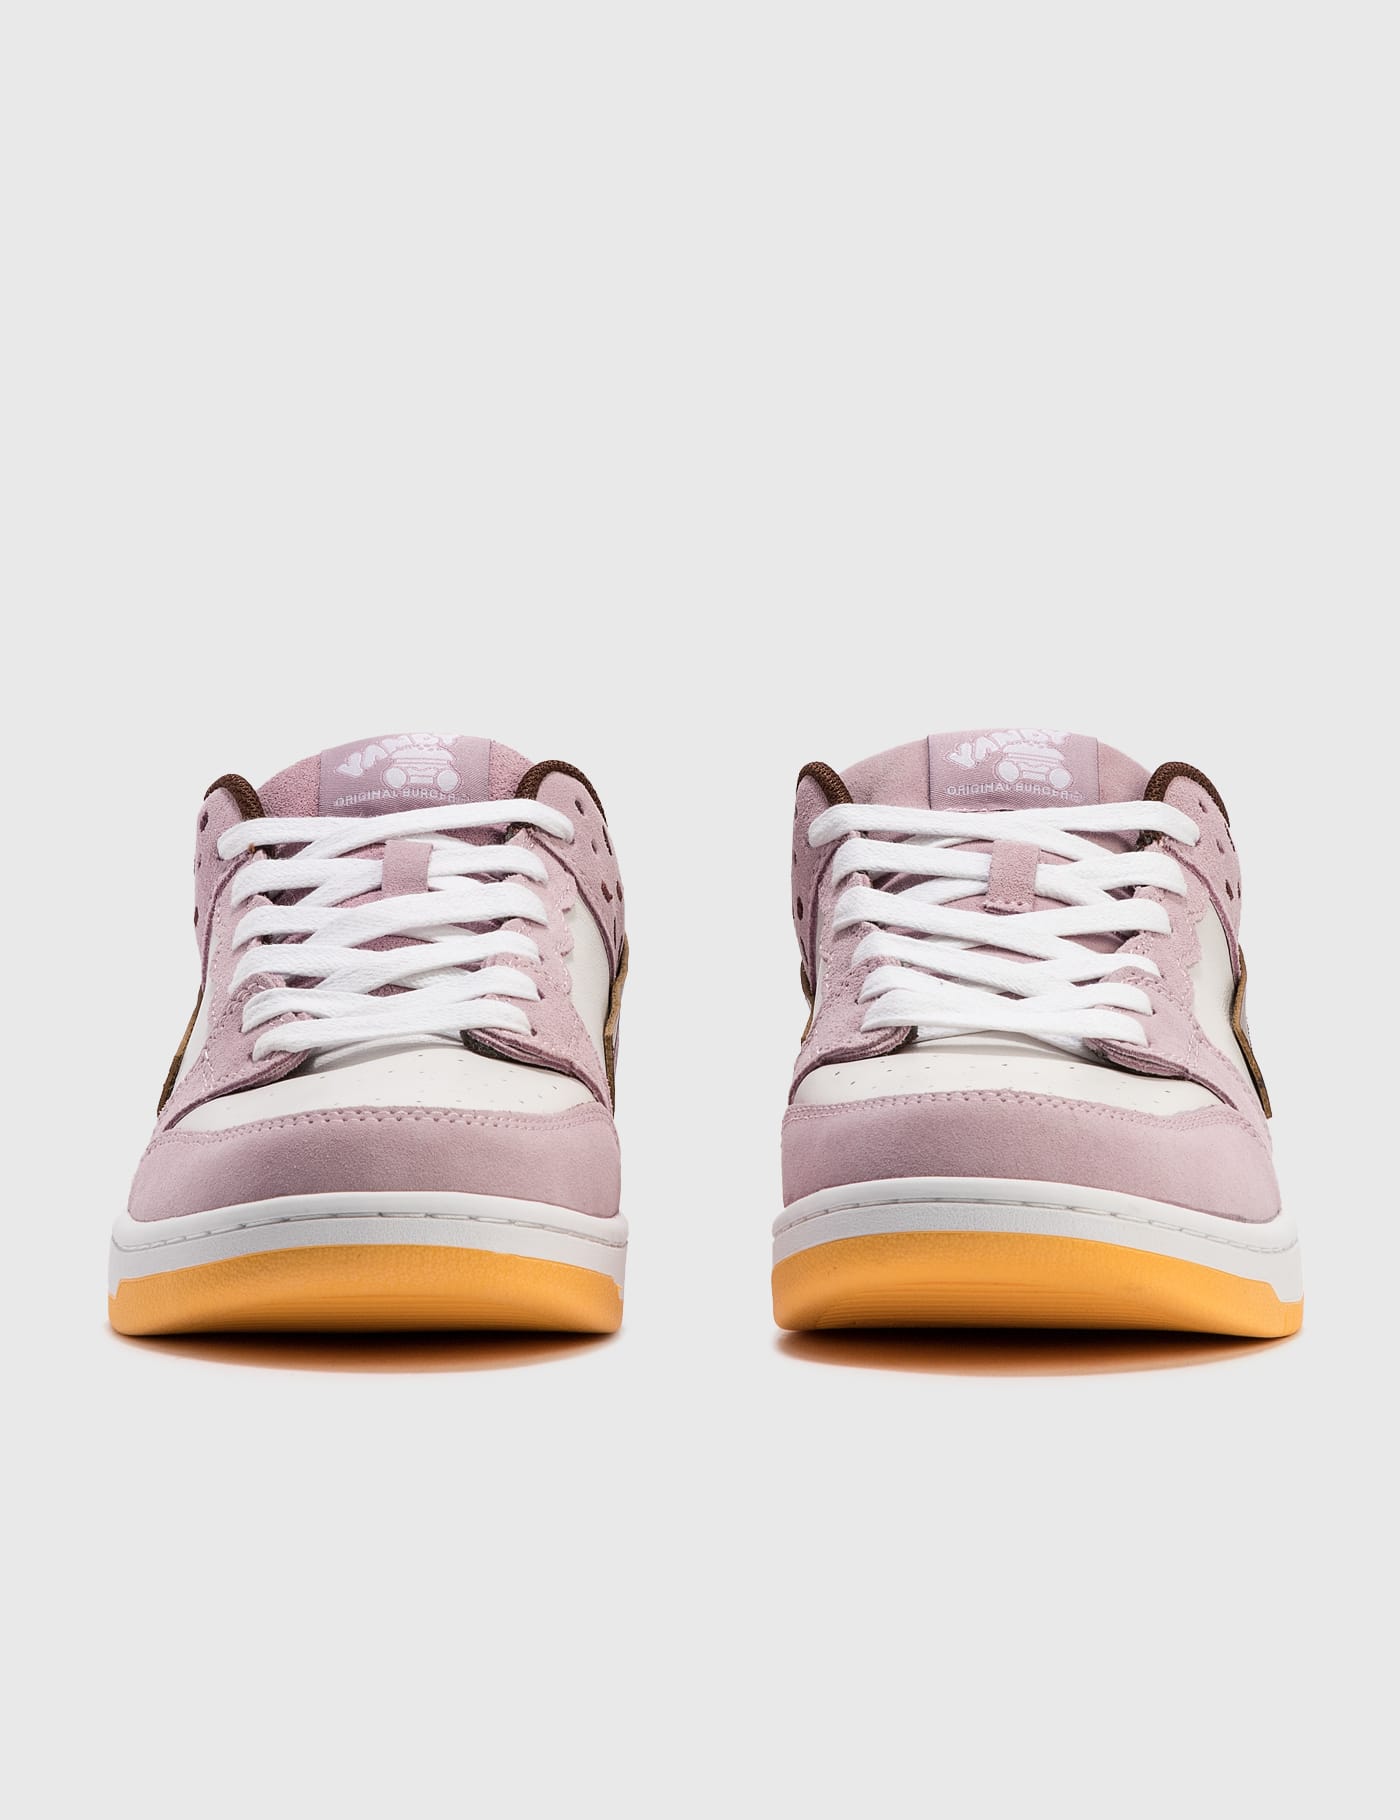 Vandy the Pink - Vandy Ice Cream Sneaker | HBX - Globally Curated